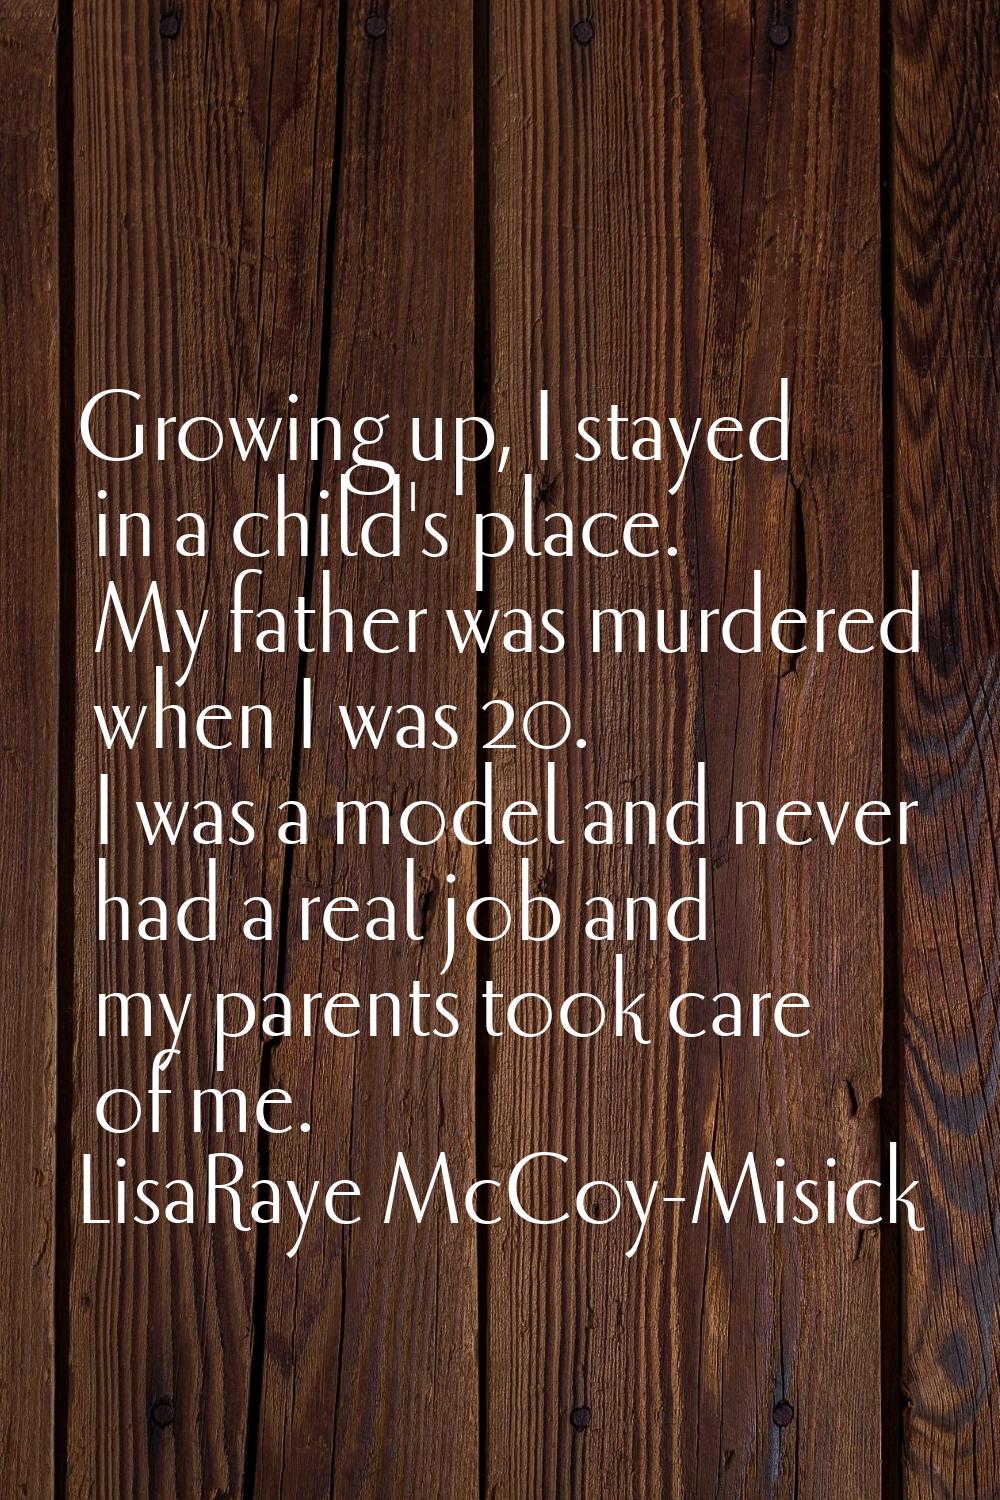 Growing up, I stayed in a child's place. My father was murdered when I was 20. I was a model and ne